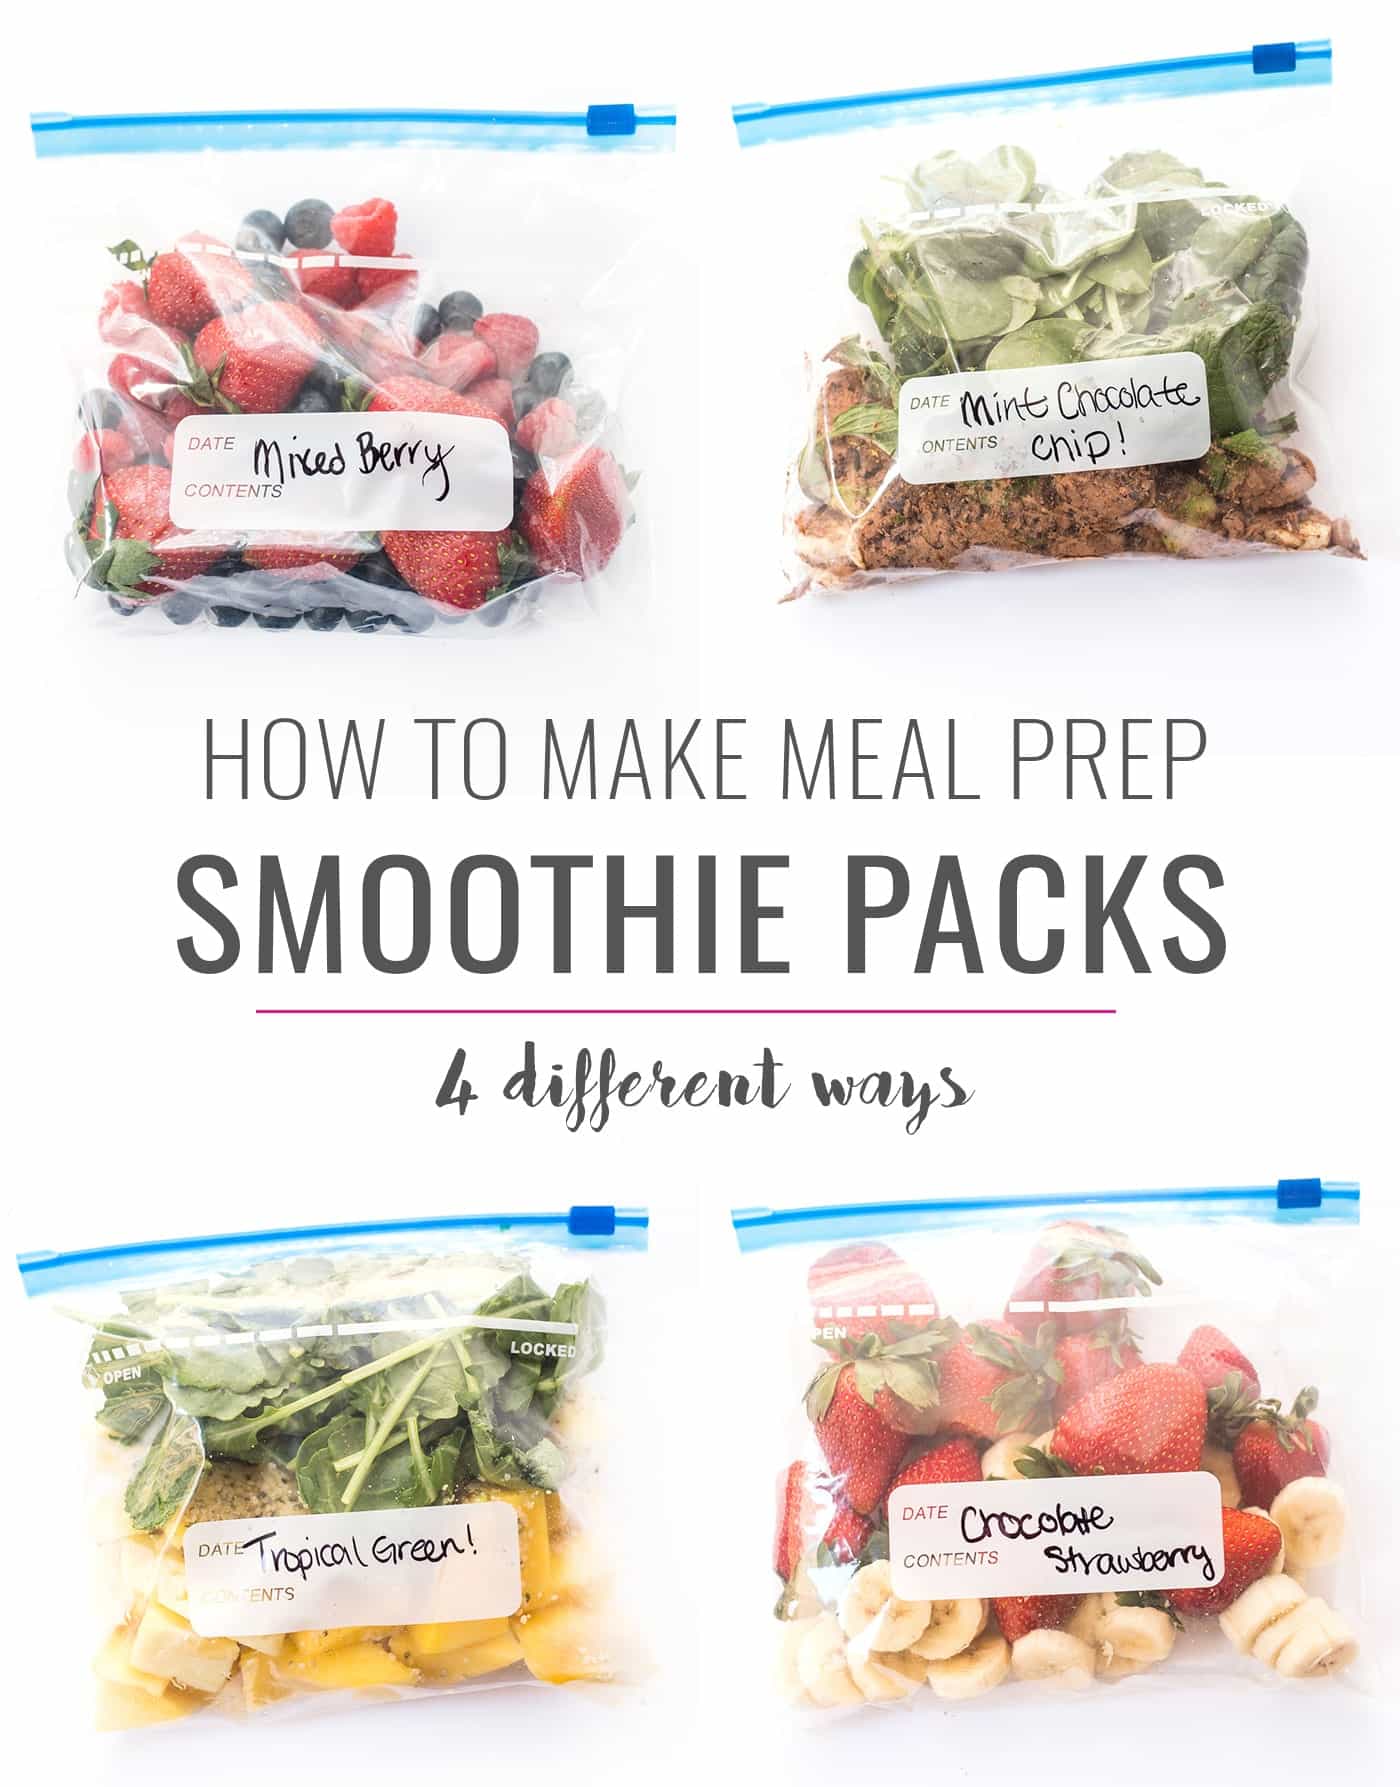 How to make Meal Prep Smoothie Packs in FOUR different flavors!